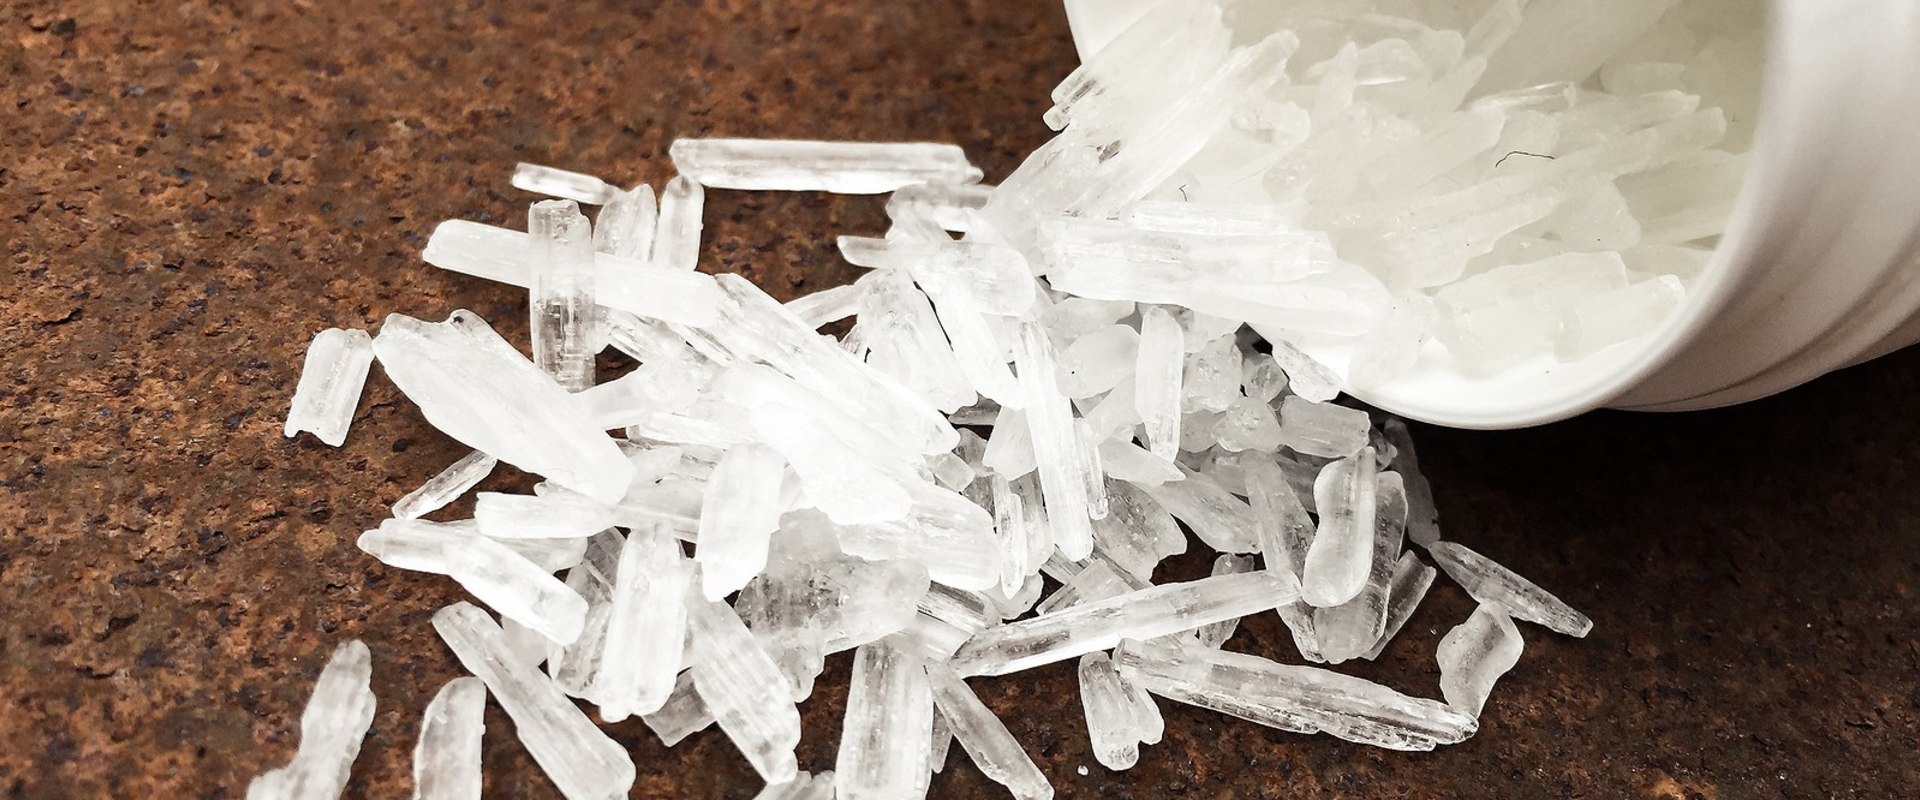 Can Crystal Meth Cause Blood in Stool?